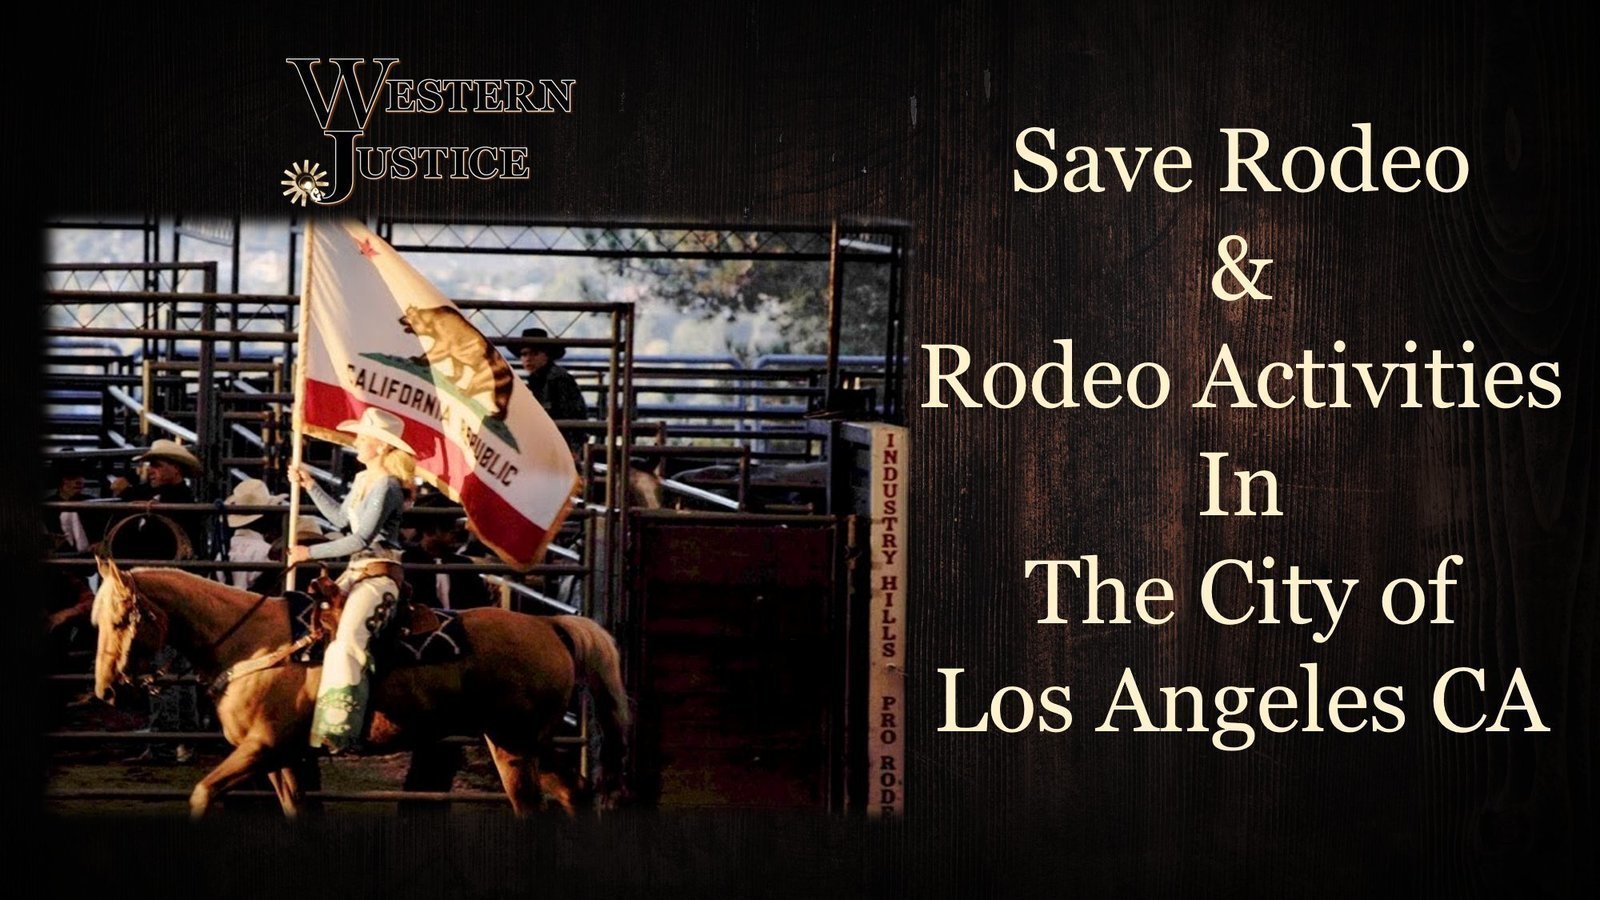 Petition · Save Rodeo In Los Angeles · Change.org